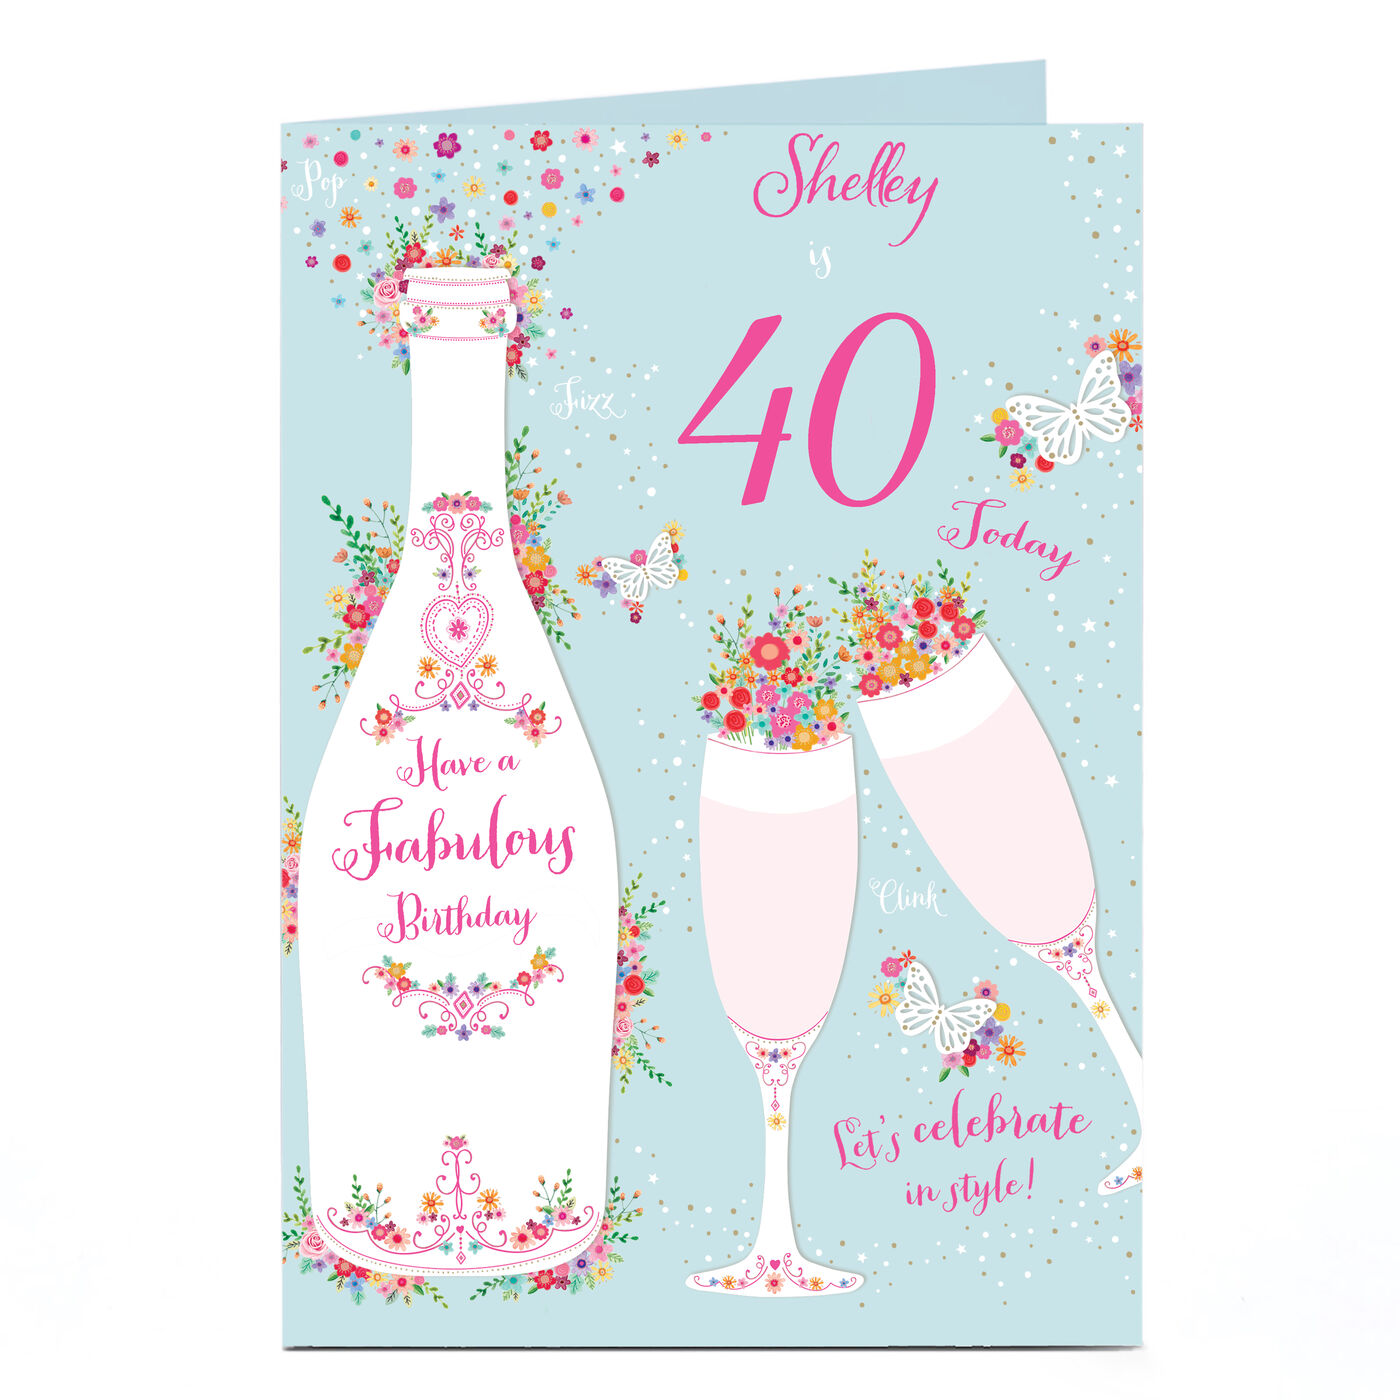 Buy Personalised Birthday Card - Champagne, Flutes & Flowers, Editable ...